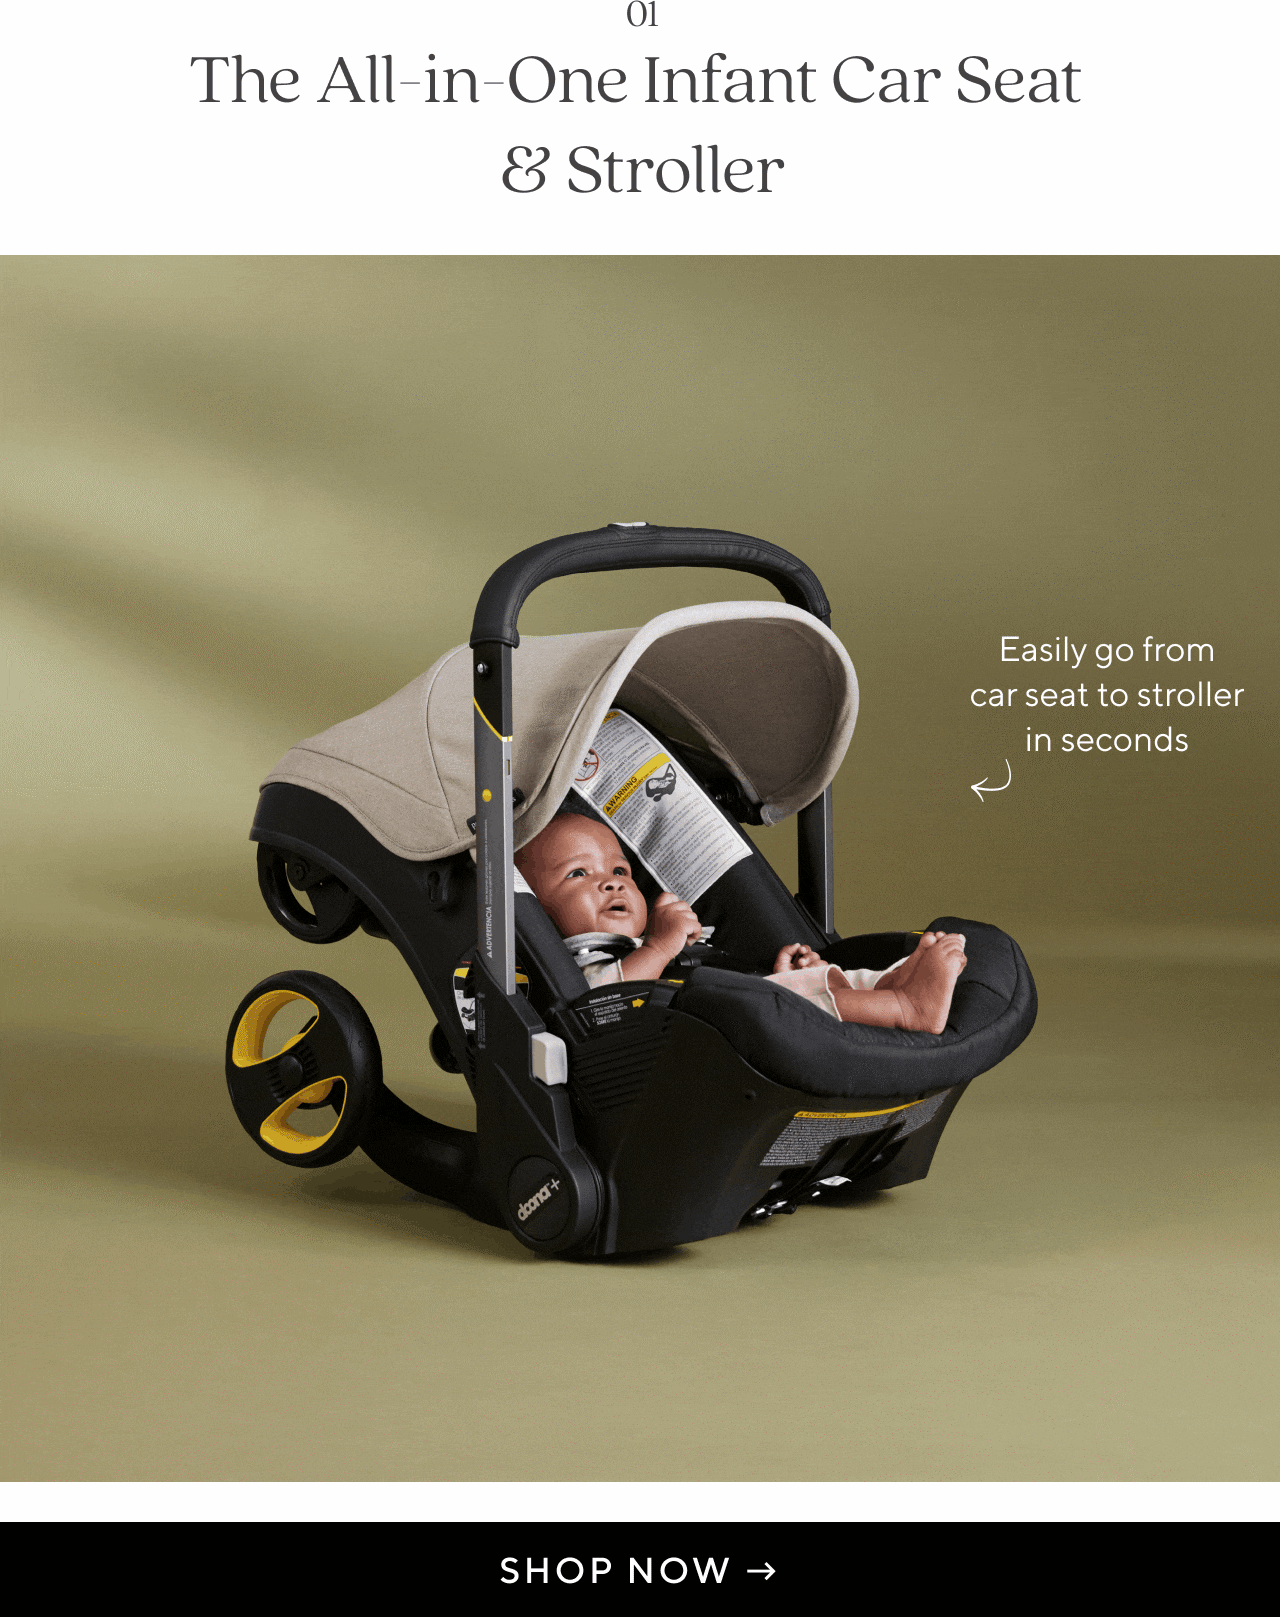 ALL IN ONE INFANT CAR SEAT AND STROLLER